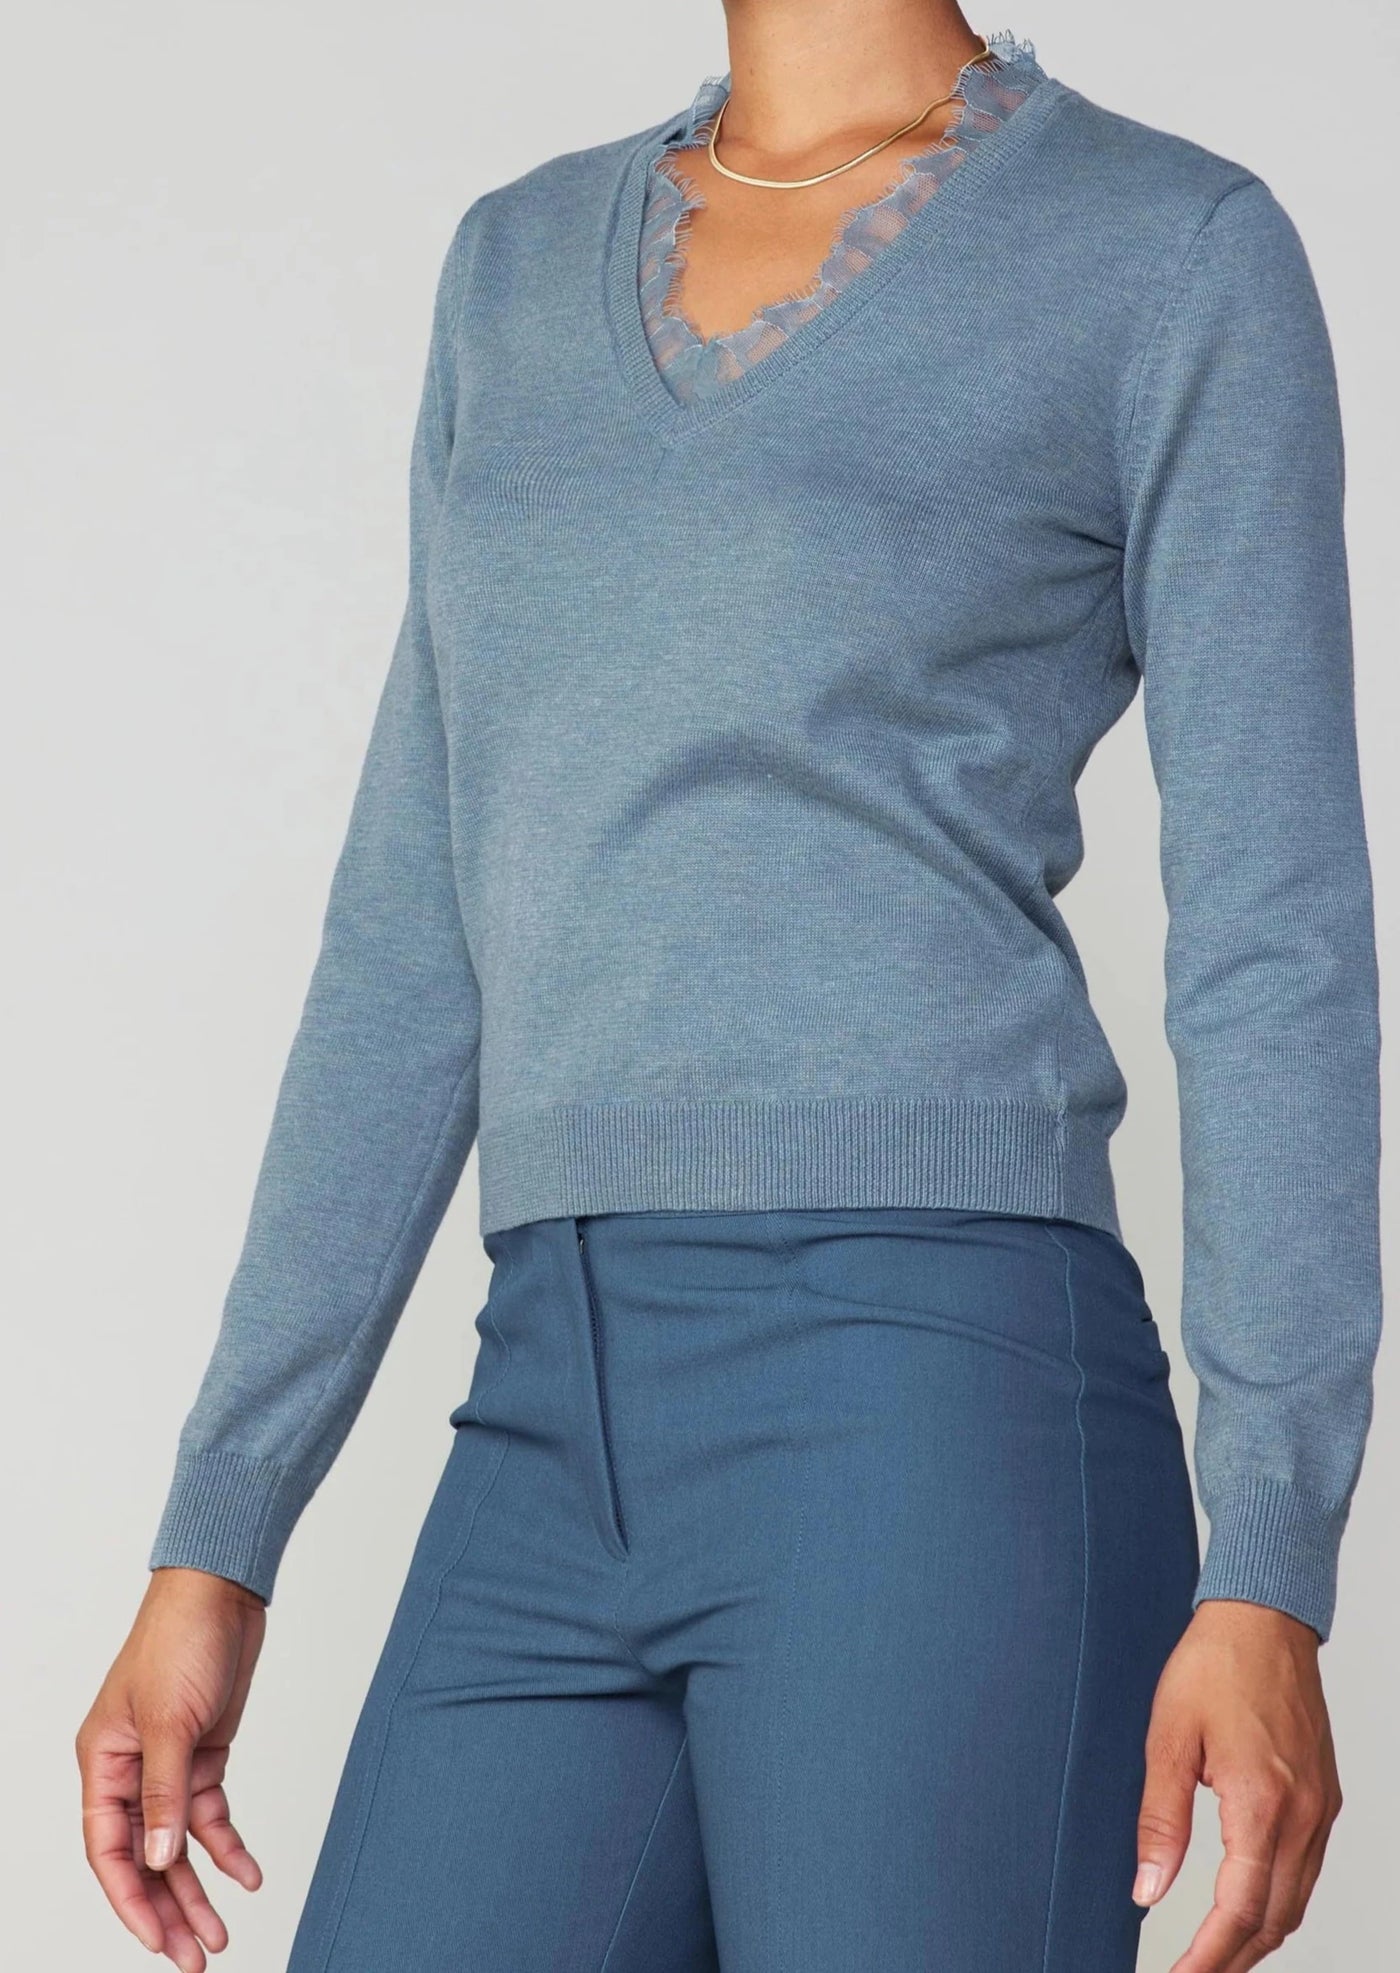 The Pink Door Lace Collar V-neck Sweater - Dusty Blue